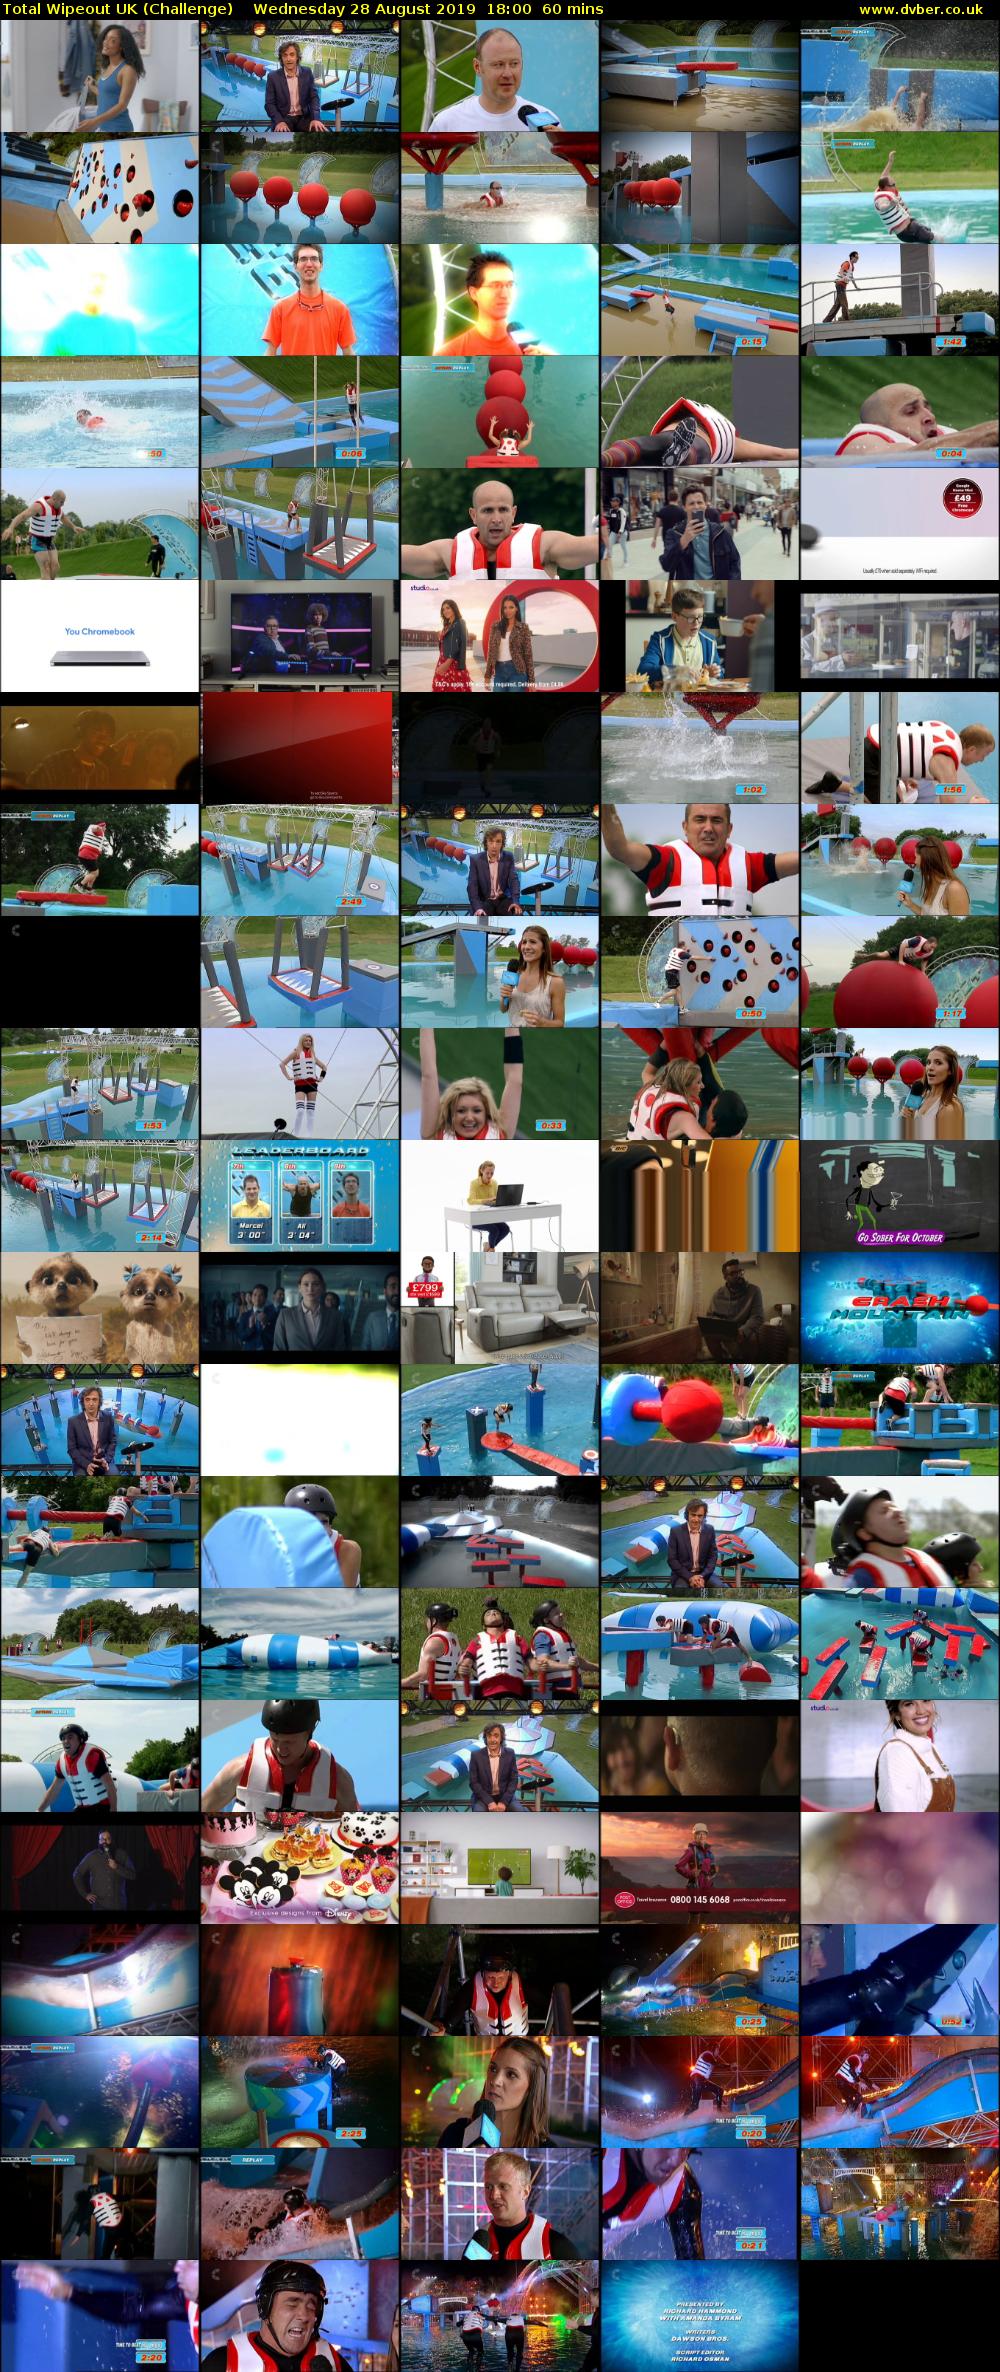 Total Wipeout UK (Challenge) Wednesday 28 August 2019 18:00 - 19:00